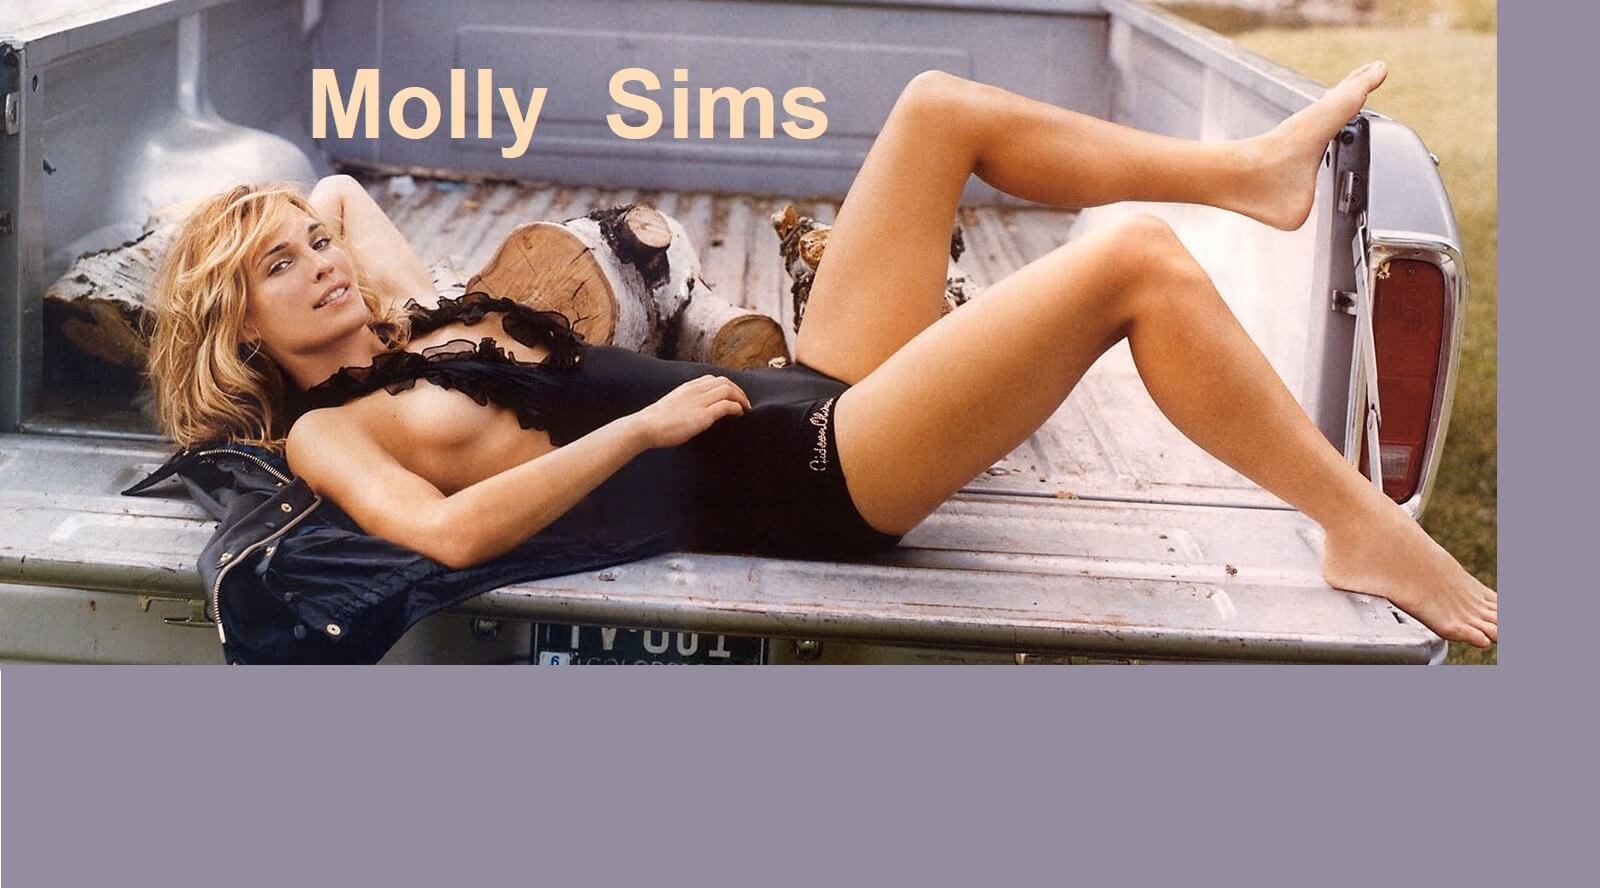 65+ Hot Pictures Of Molly Sims Will Prove That She Is One Of The Sexiest Women Alive | Best Of Comic Books